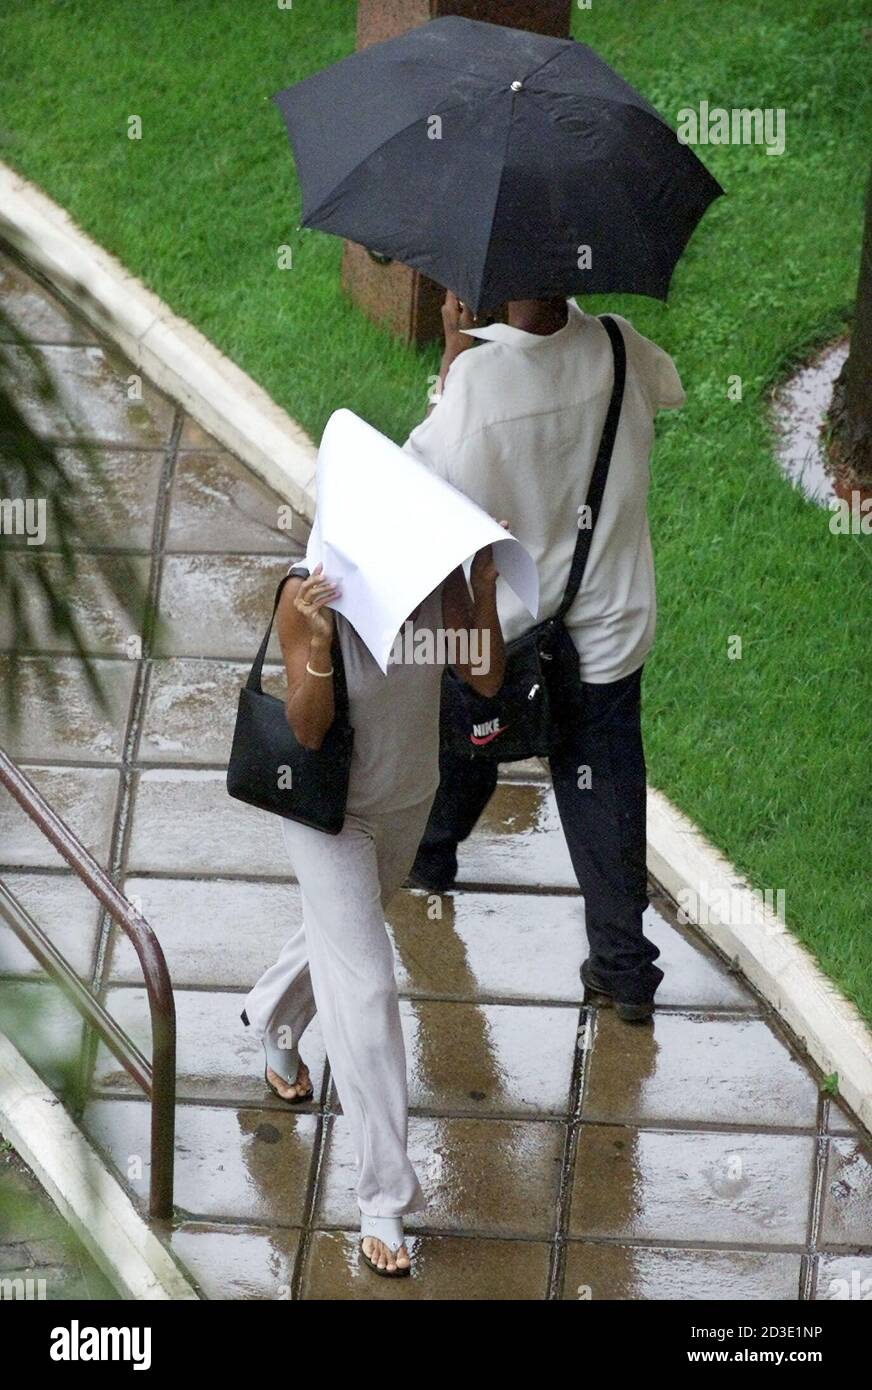 Caught in a downpour without proper cover, unlike the man behind her, a pedestrian uses a large envelope to shield herself in Brasilia March 20, 2001. Commuters were greeted with heavy rainfall on the first official day of Fall in the nation's capital.  GN/SV Stock Photo